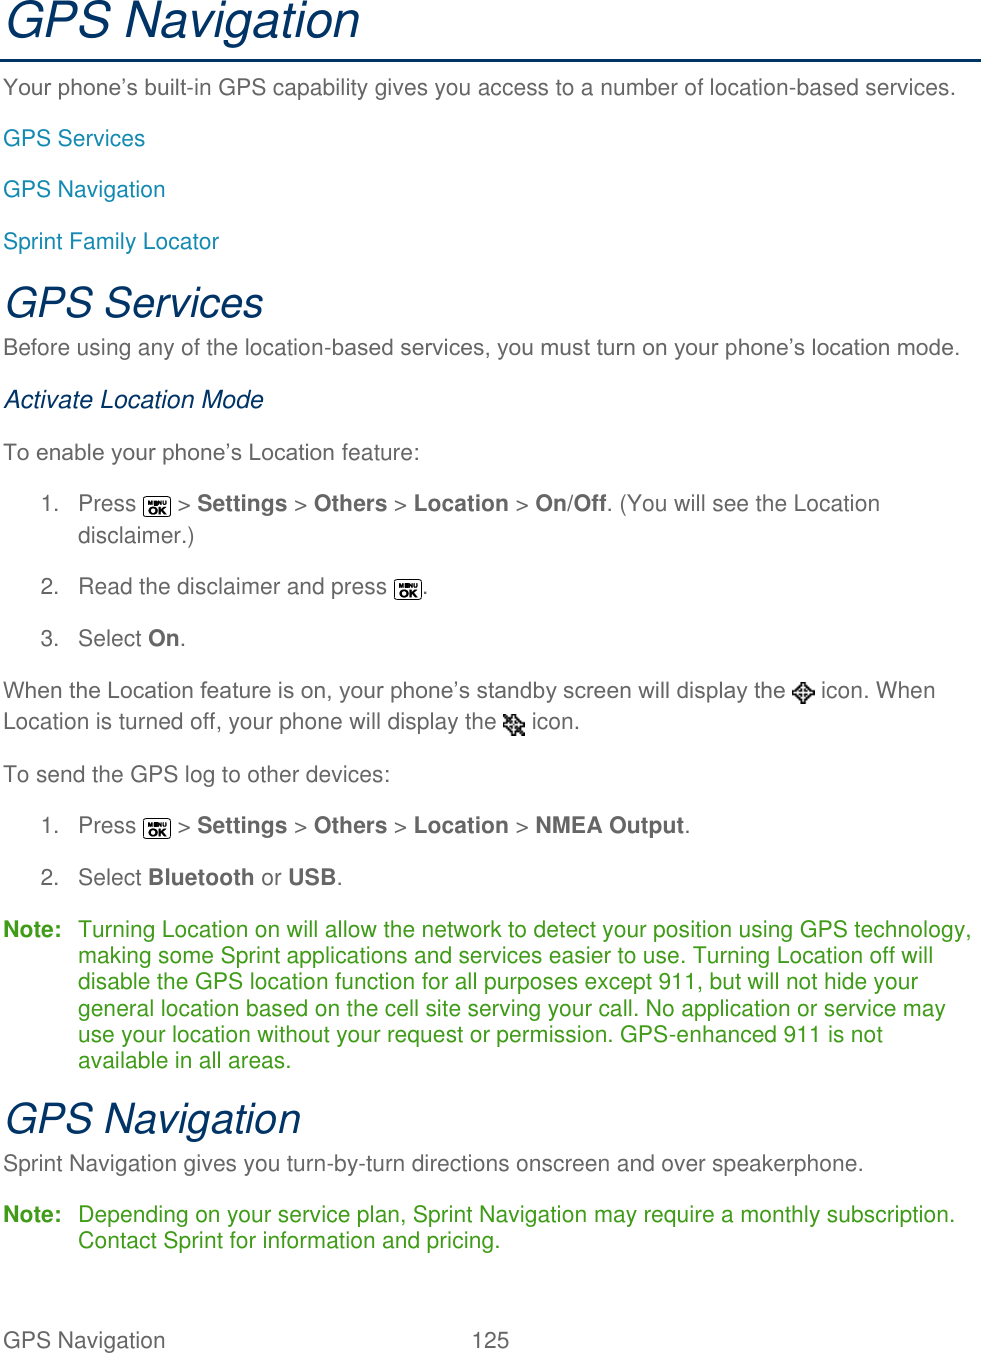  GPS Navigation   125   GPS Navigation Your phone’s built-in GPS capability gives you access to a number of location-based services. GPS Services GPS Navigation Sprint Family Locator GPS Services Before using any of the location-based services, you must turn on your phone’s location mode. Activate Location Mode To enable your phone’s Location feature: 1.  Press   &gt; Settings &gt; Others &gt; Location &gt; On/Off. (You will see the Location disclaimer.) 2.  Read the disclaimer and press  . 3.  Select On. When the Location feature is on, your phone’s standby screen will display the   icon. When Location is turned off, your phone will display the   icon. To send the GPS log to other devices: 1.  Press   &gt; Settings &gt; Others &gt; Location &gt; NMEA Output. 2.  Select Bluetooth or USB. Note:  Turning Location on will allow the network to detect your position using GPS technology, making some Sprint applications and services easier to use. Turning Location off will disable the GPS location function for all purposes except 911, but will not hide your general location based on the cell site serving your call. No application or service may use your location without your request or permission. GPS-enhanced 911 is not available in all areas. GPS Navigation Sprint Navigation gives you turn-by-turn directions onscreen and over speakerphone. Note:  Depending on your service plan, Sprint Navigation may require a monthly subscription. Contact Sprint for information and pricing. 